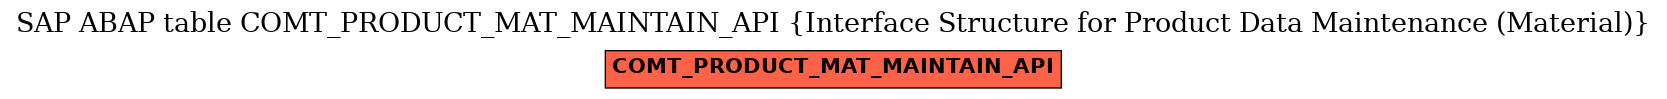 E-R Diagram for table COMT_PRODUCT_MAT_MAINTAIN_API (Interface Structure for Product Data Maintenance (Material))